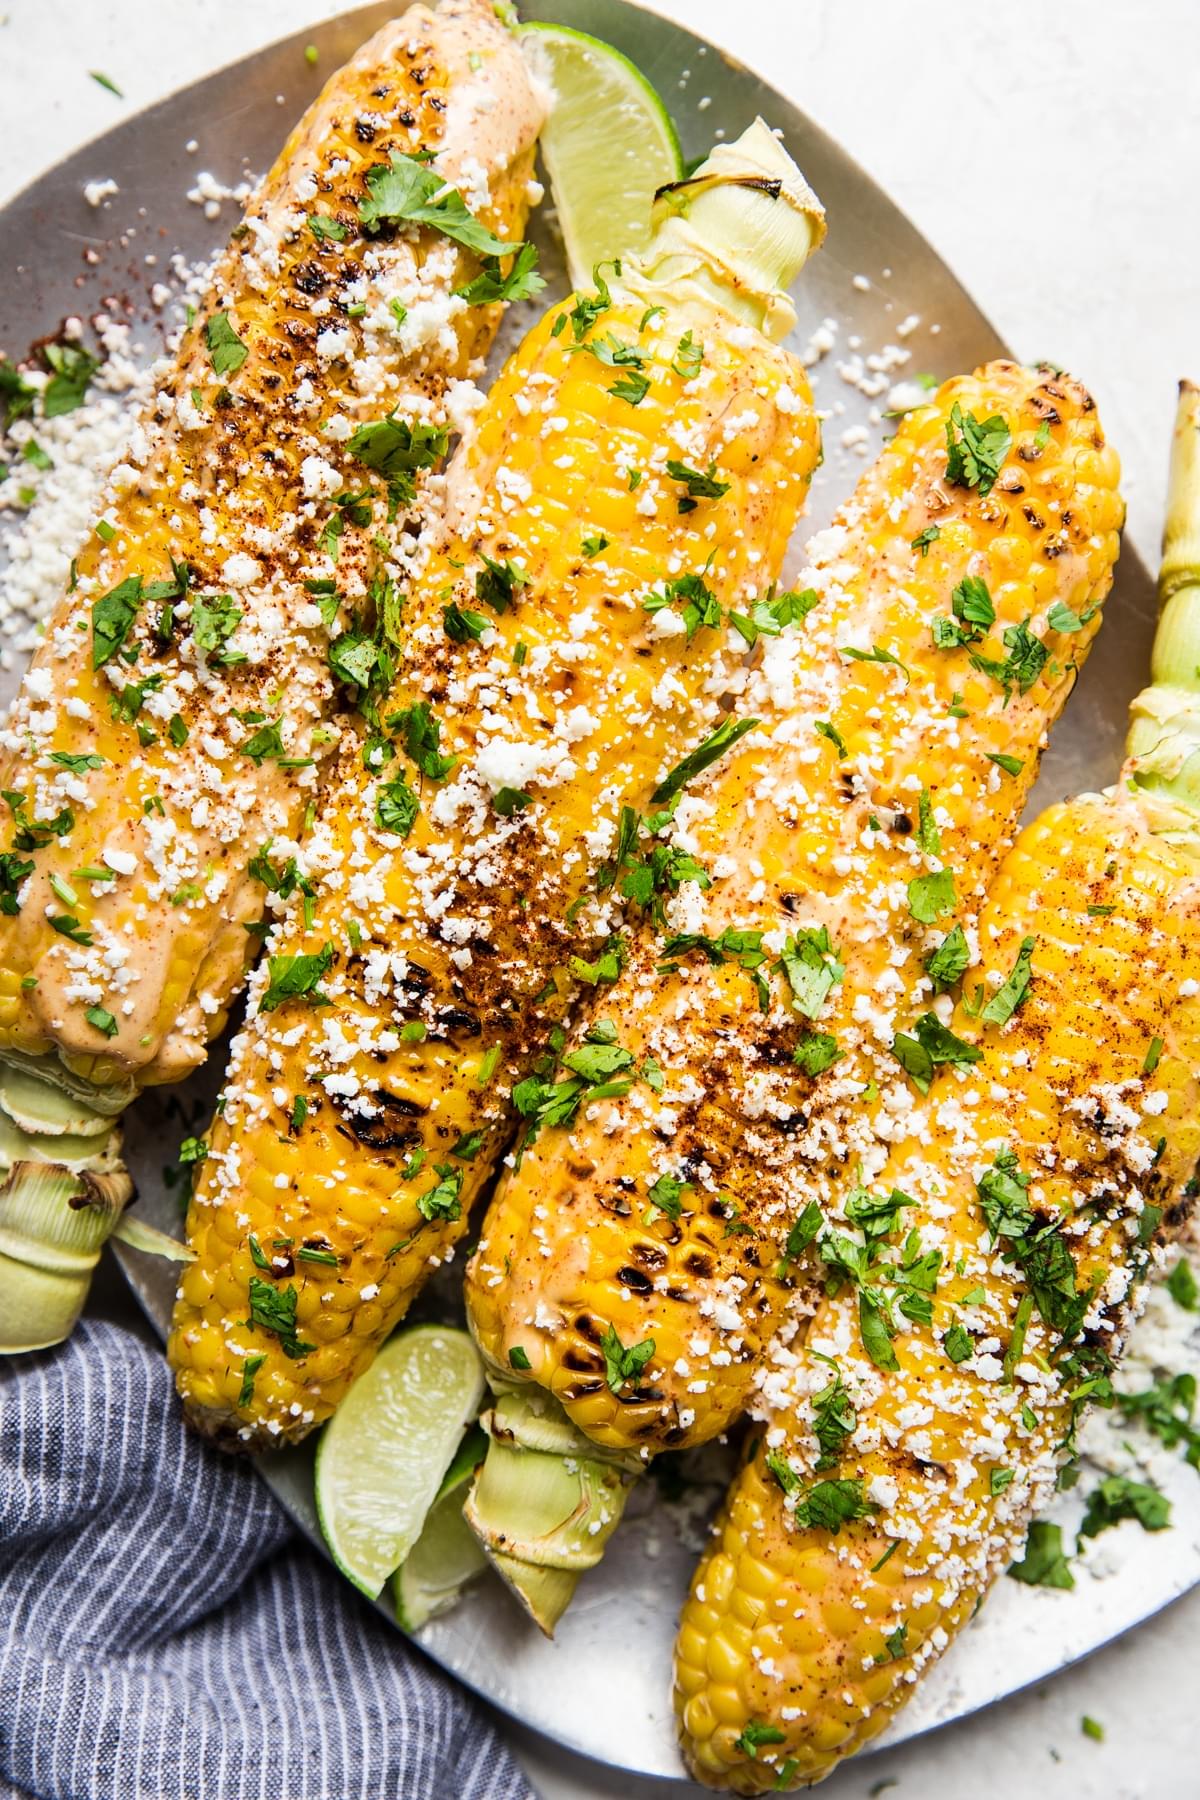 Plater of Elote (Mexican Street Corn) topped with fresh cilantro and slices of limes